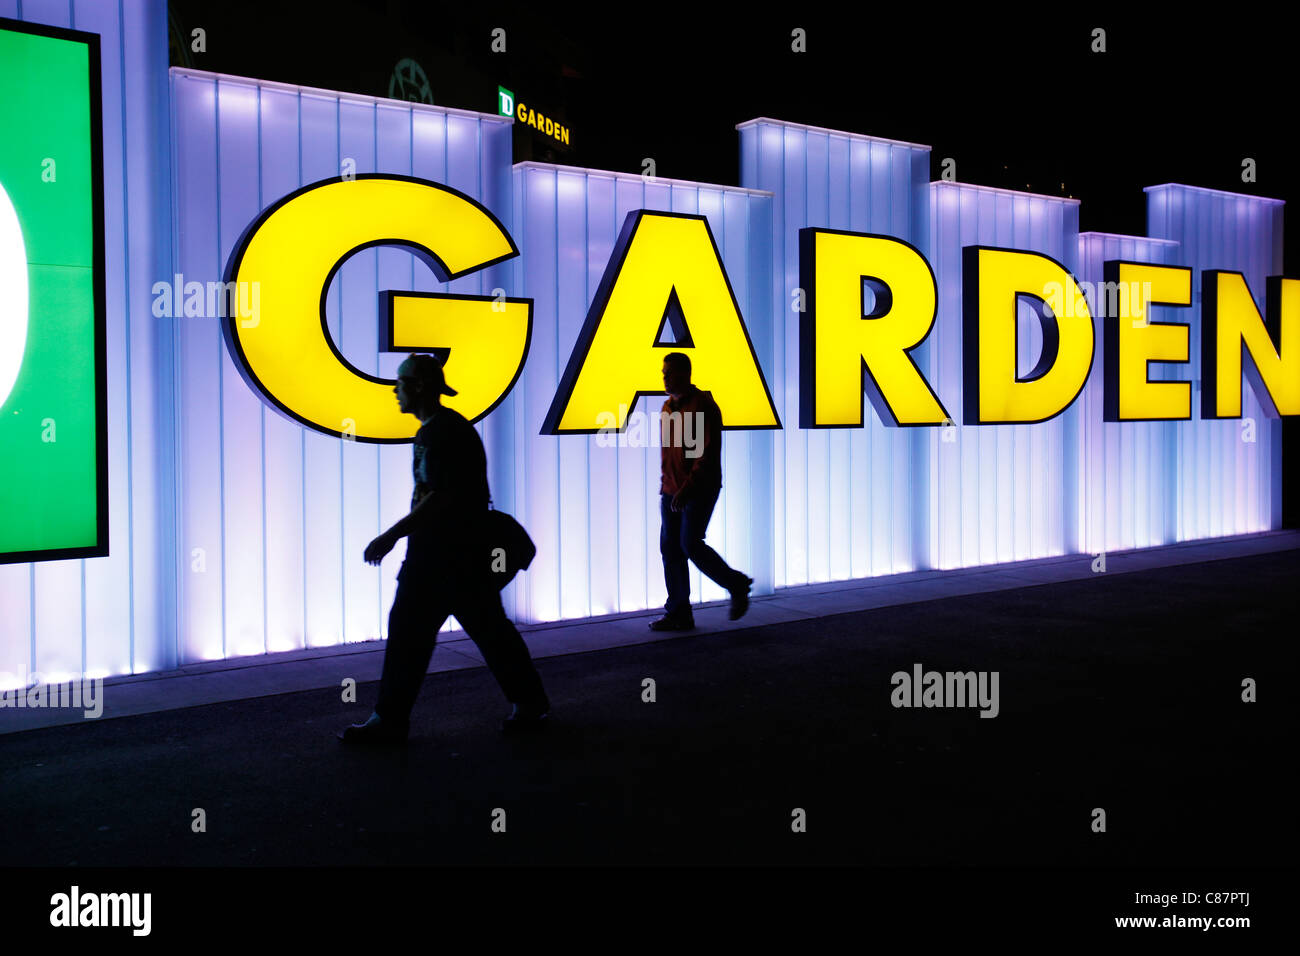 a-sign-outside-the-td-garden-sports-arena-where-the-celtics-and-the-C87PTJ.jpg